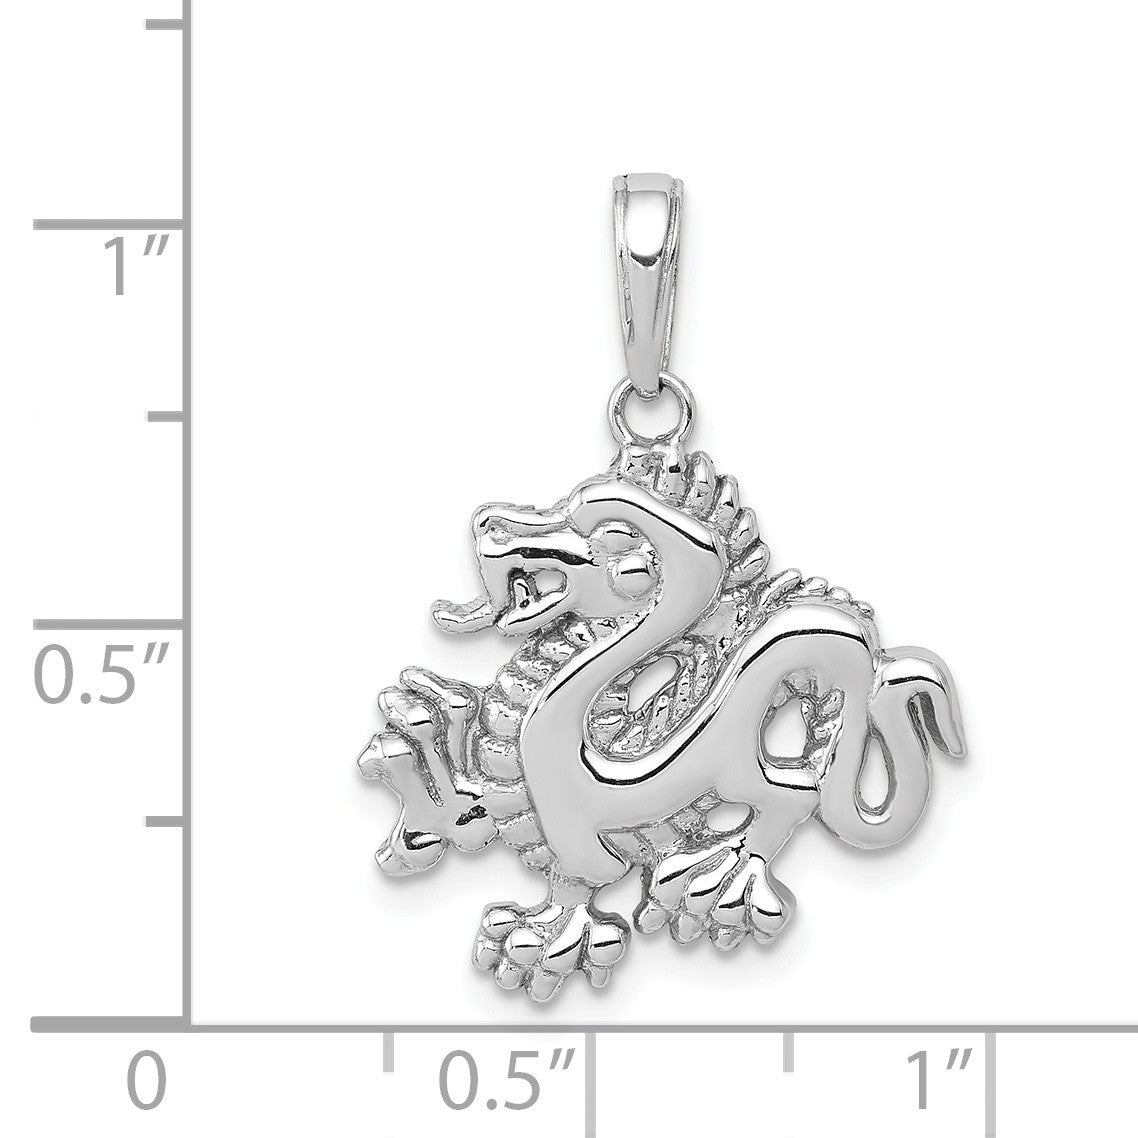 Alternate view of the 14k White Gold 2D Dragon Pendant, 18mm by The Black Bow Jewelry Co.